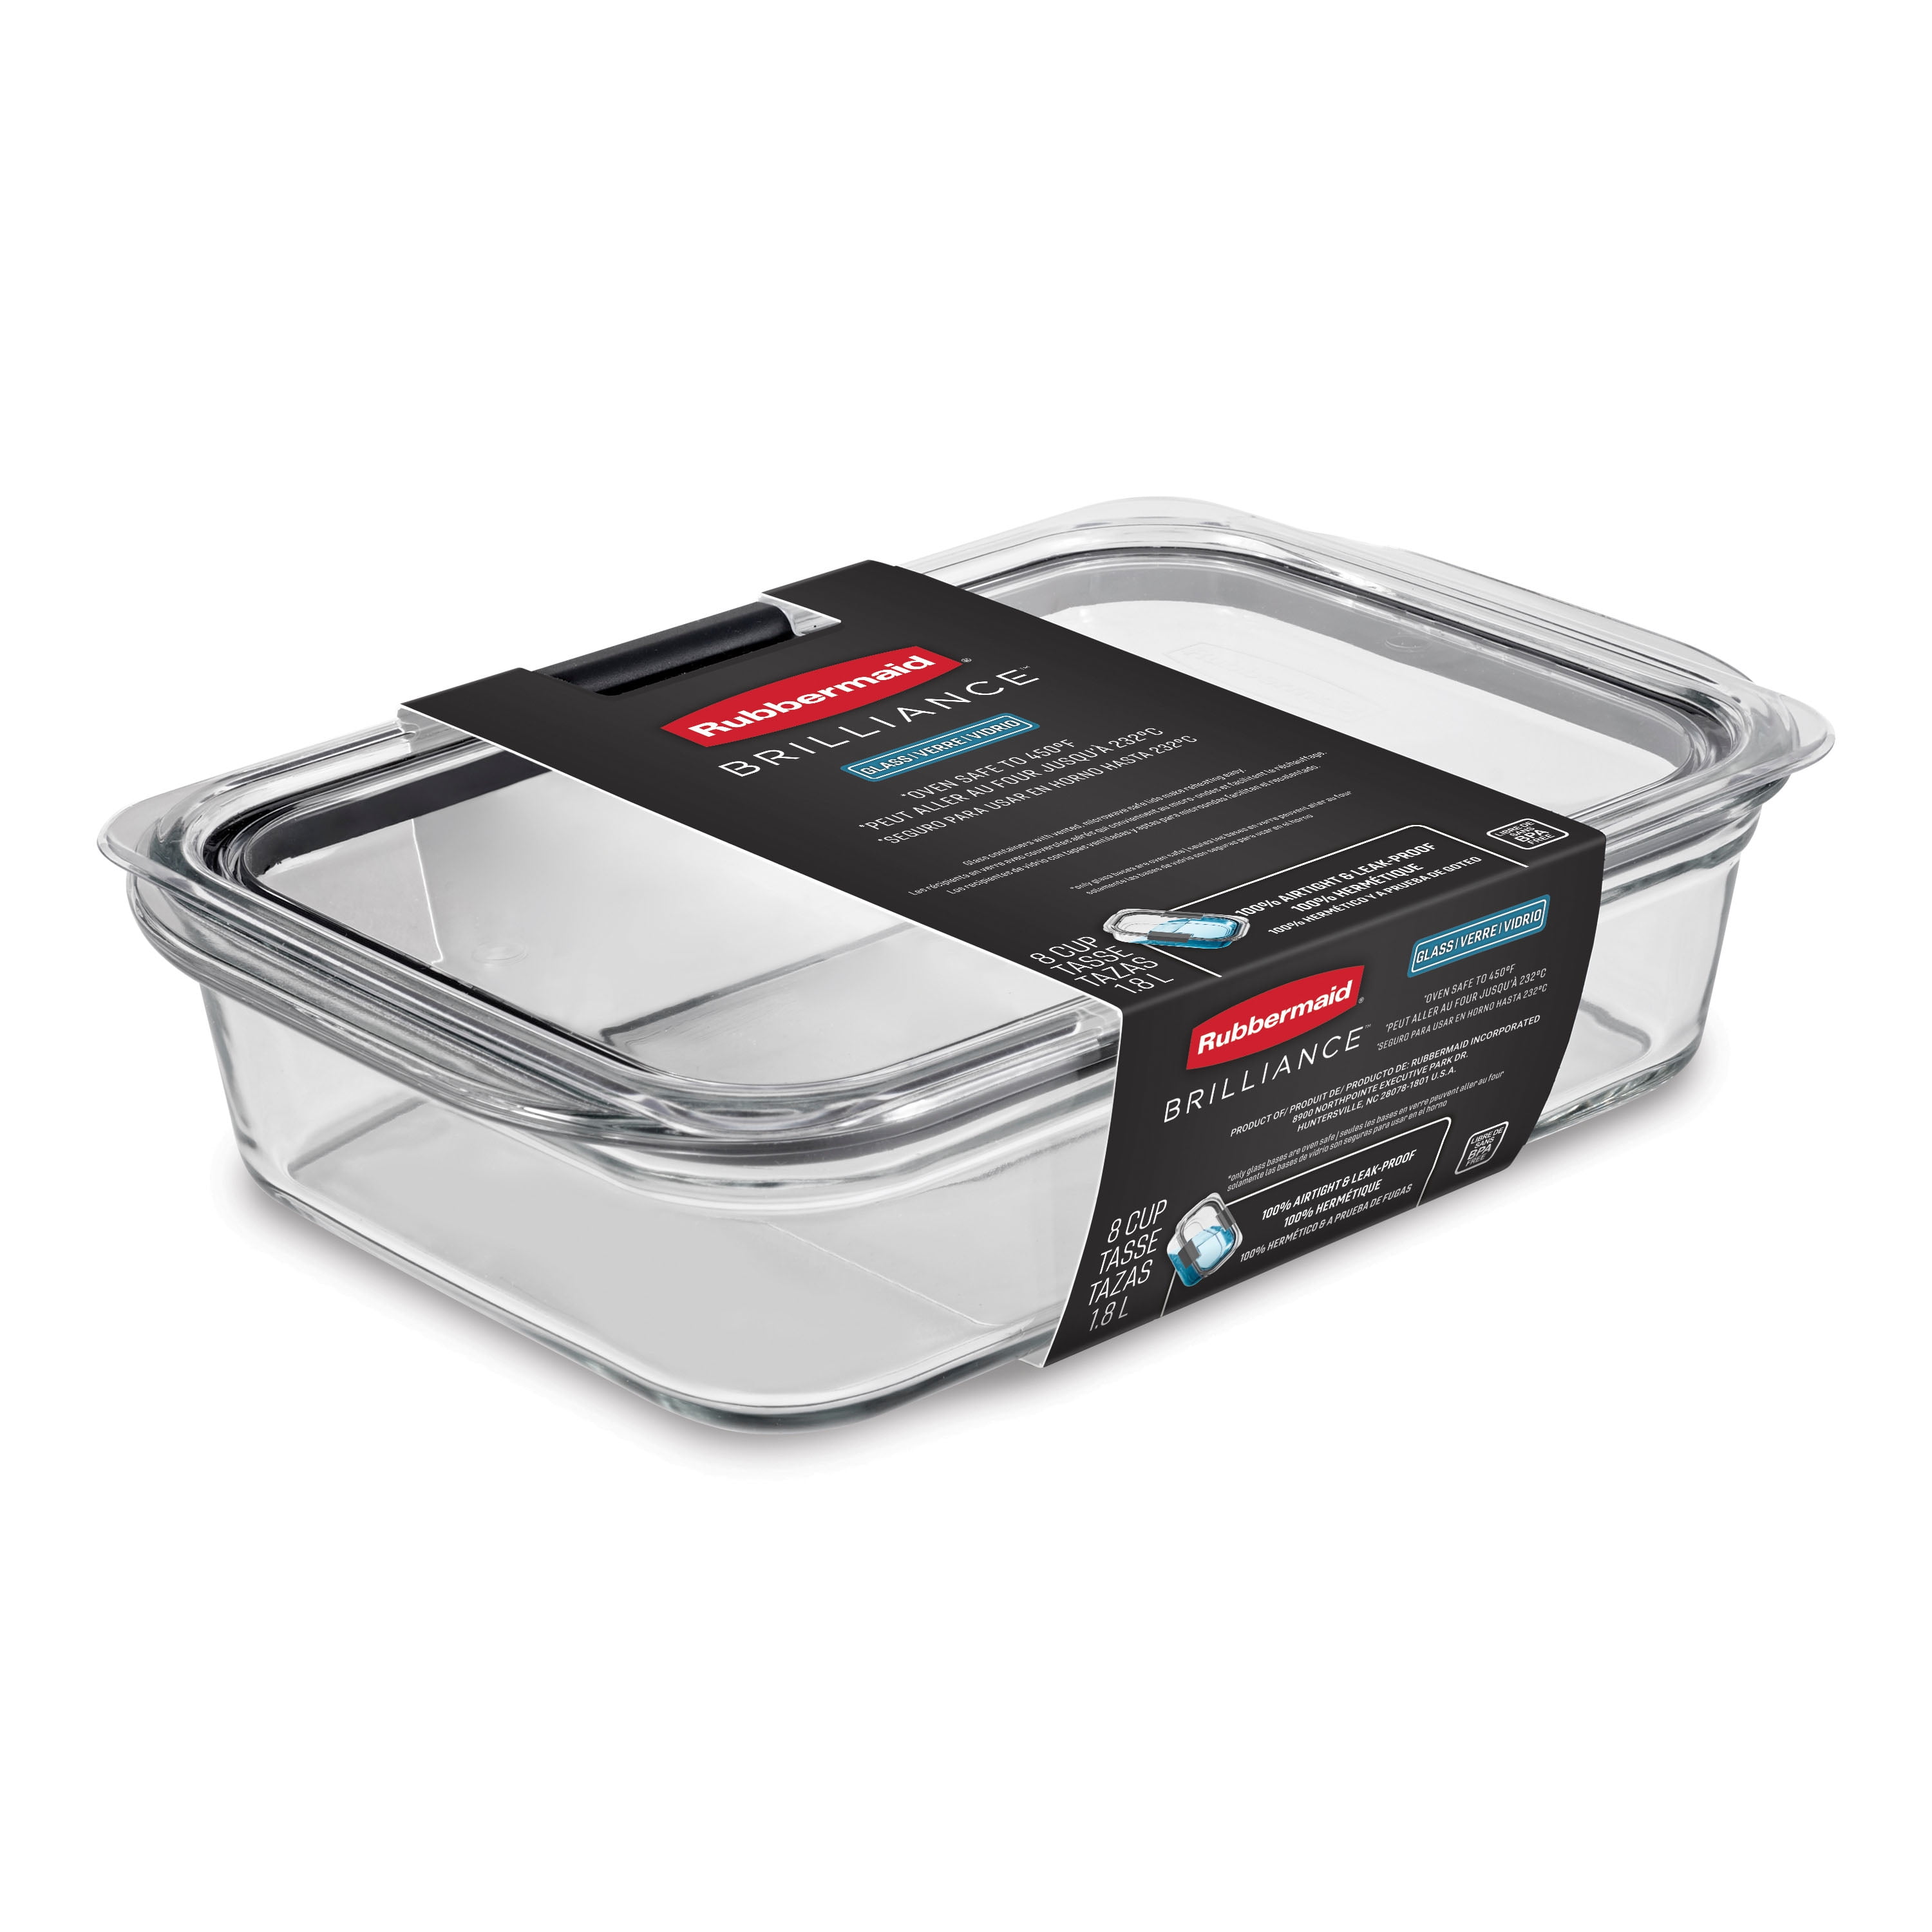 Rubbermaid Brilliance BPA Free Food Storage Containers with Lids, Airtight,  Stain Resistant, Dishwasher Safe, Set of 3 (8.1, 6.6 & 1.3 Cup Containers)